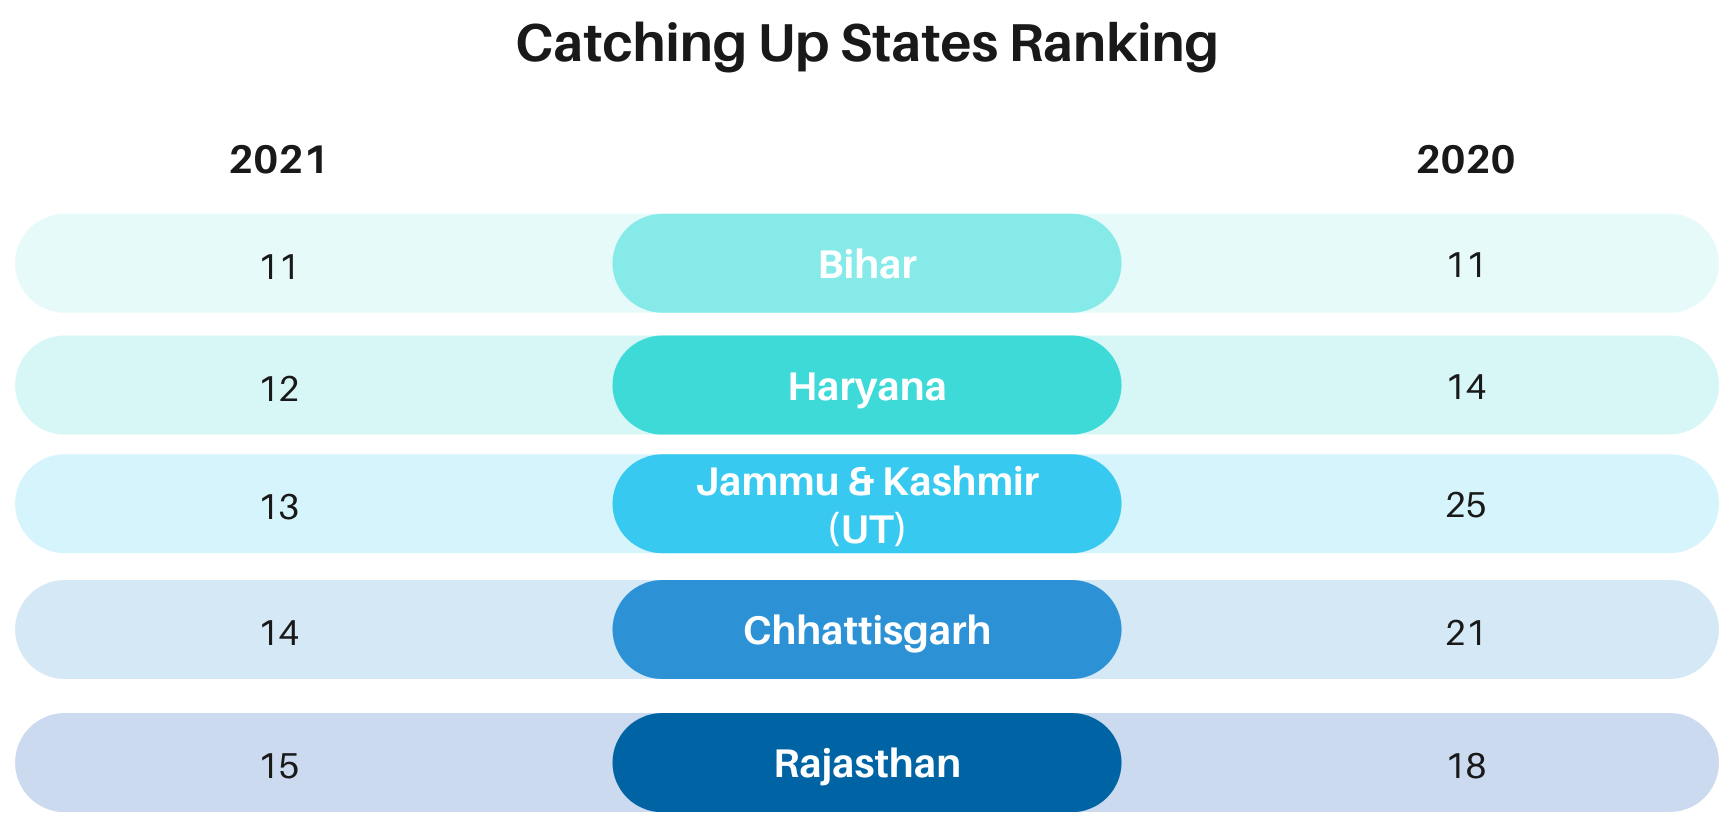 Shift In Priorities Of Catching Up States In 2021-image